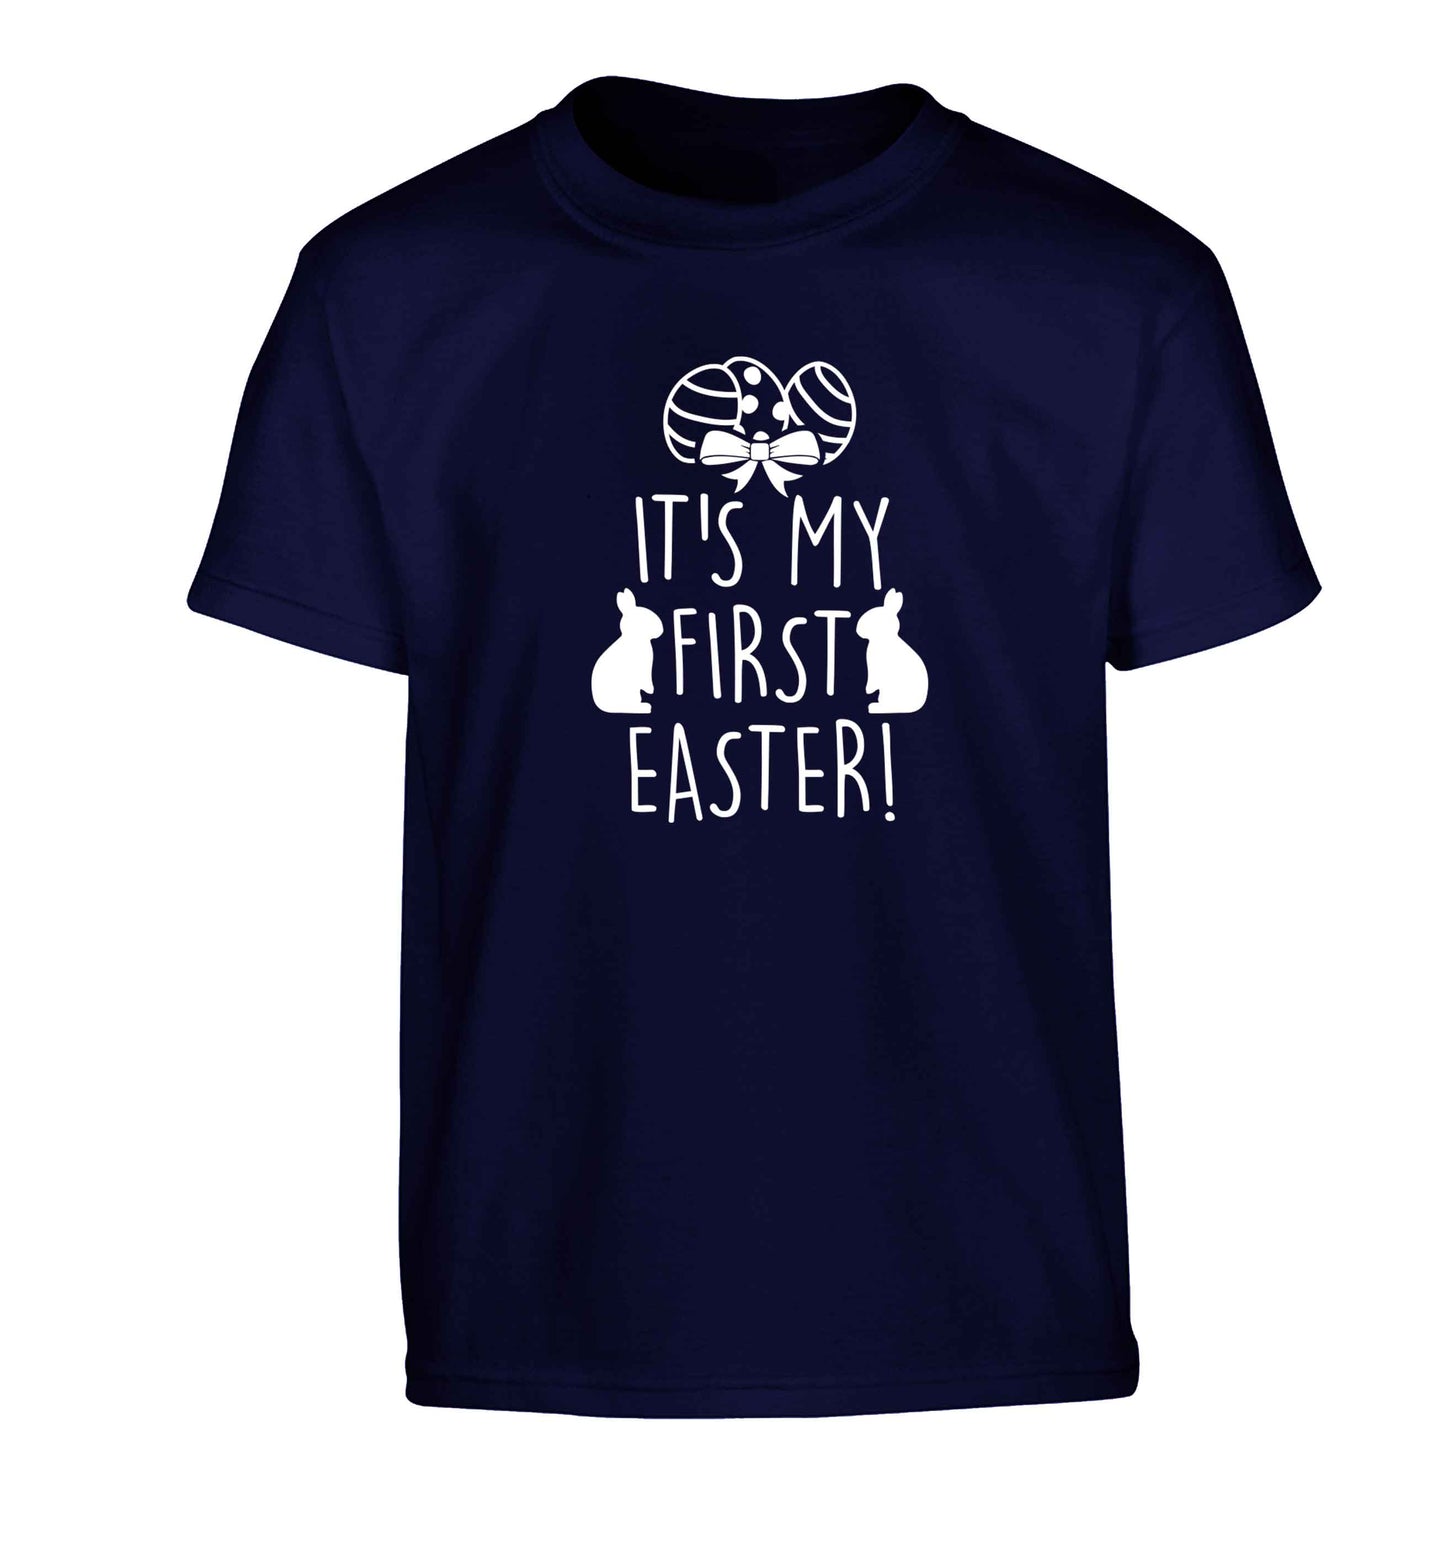 It's my first Easter Children's navy Tshirt 12-13 Years